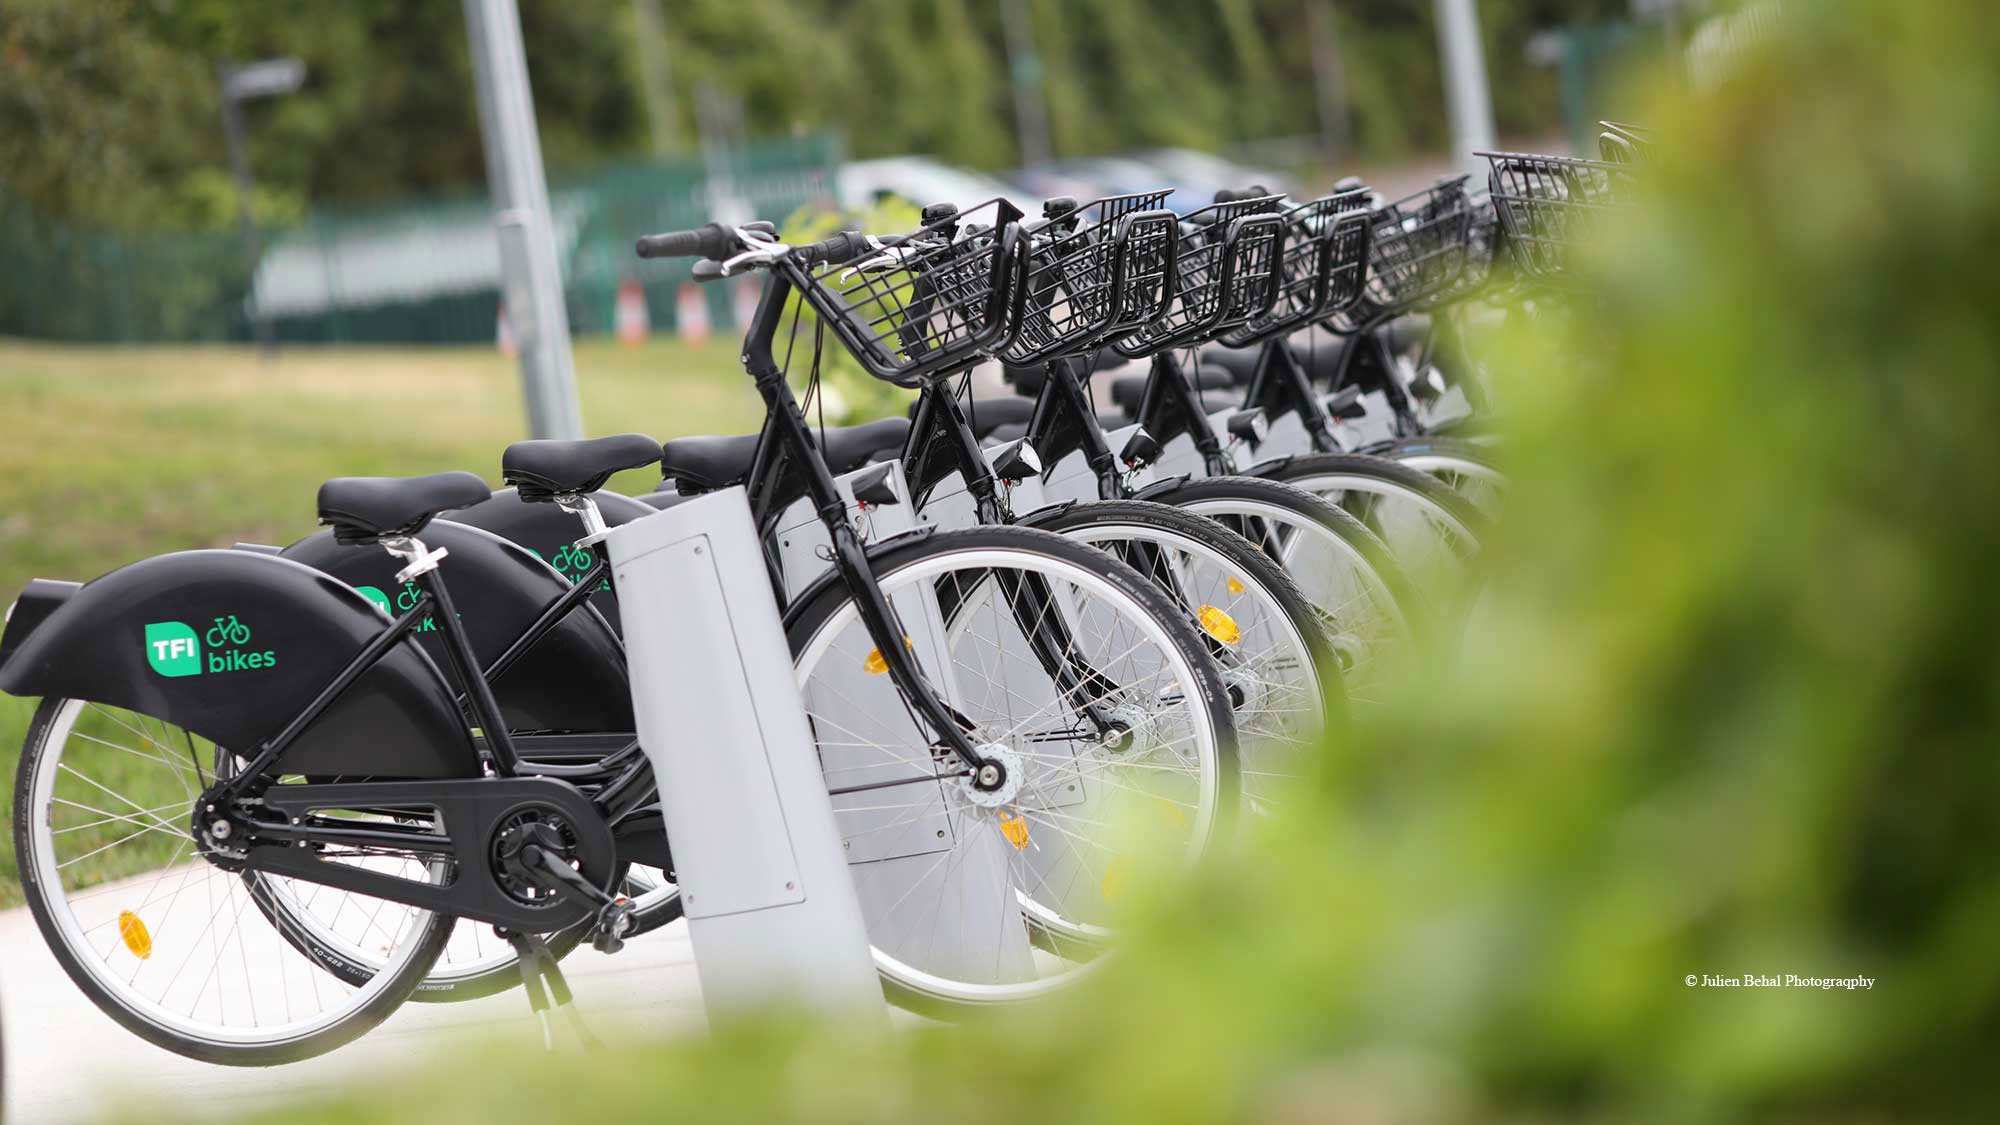 Bicycles in a row at a docking station.